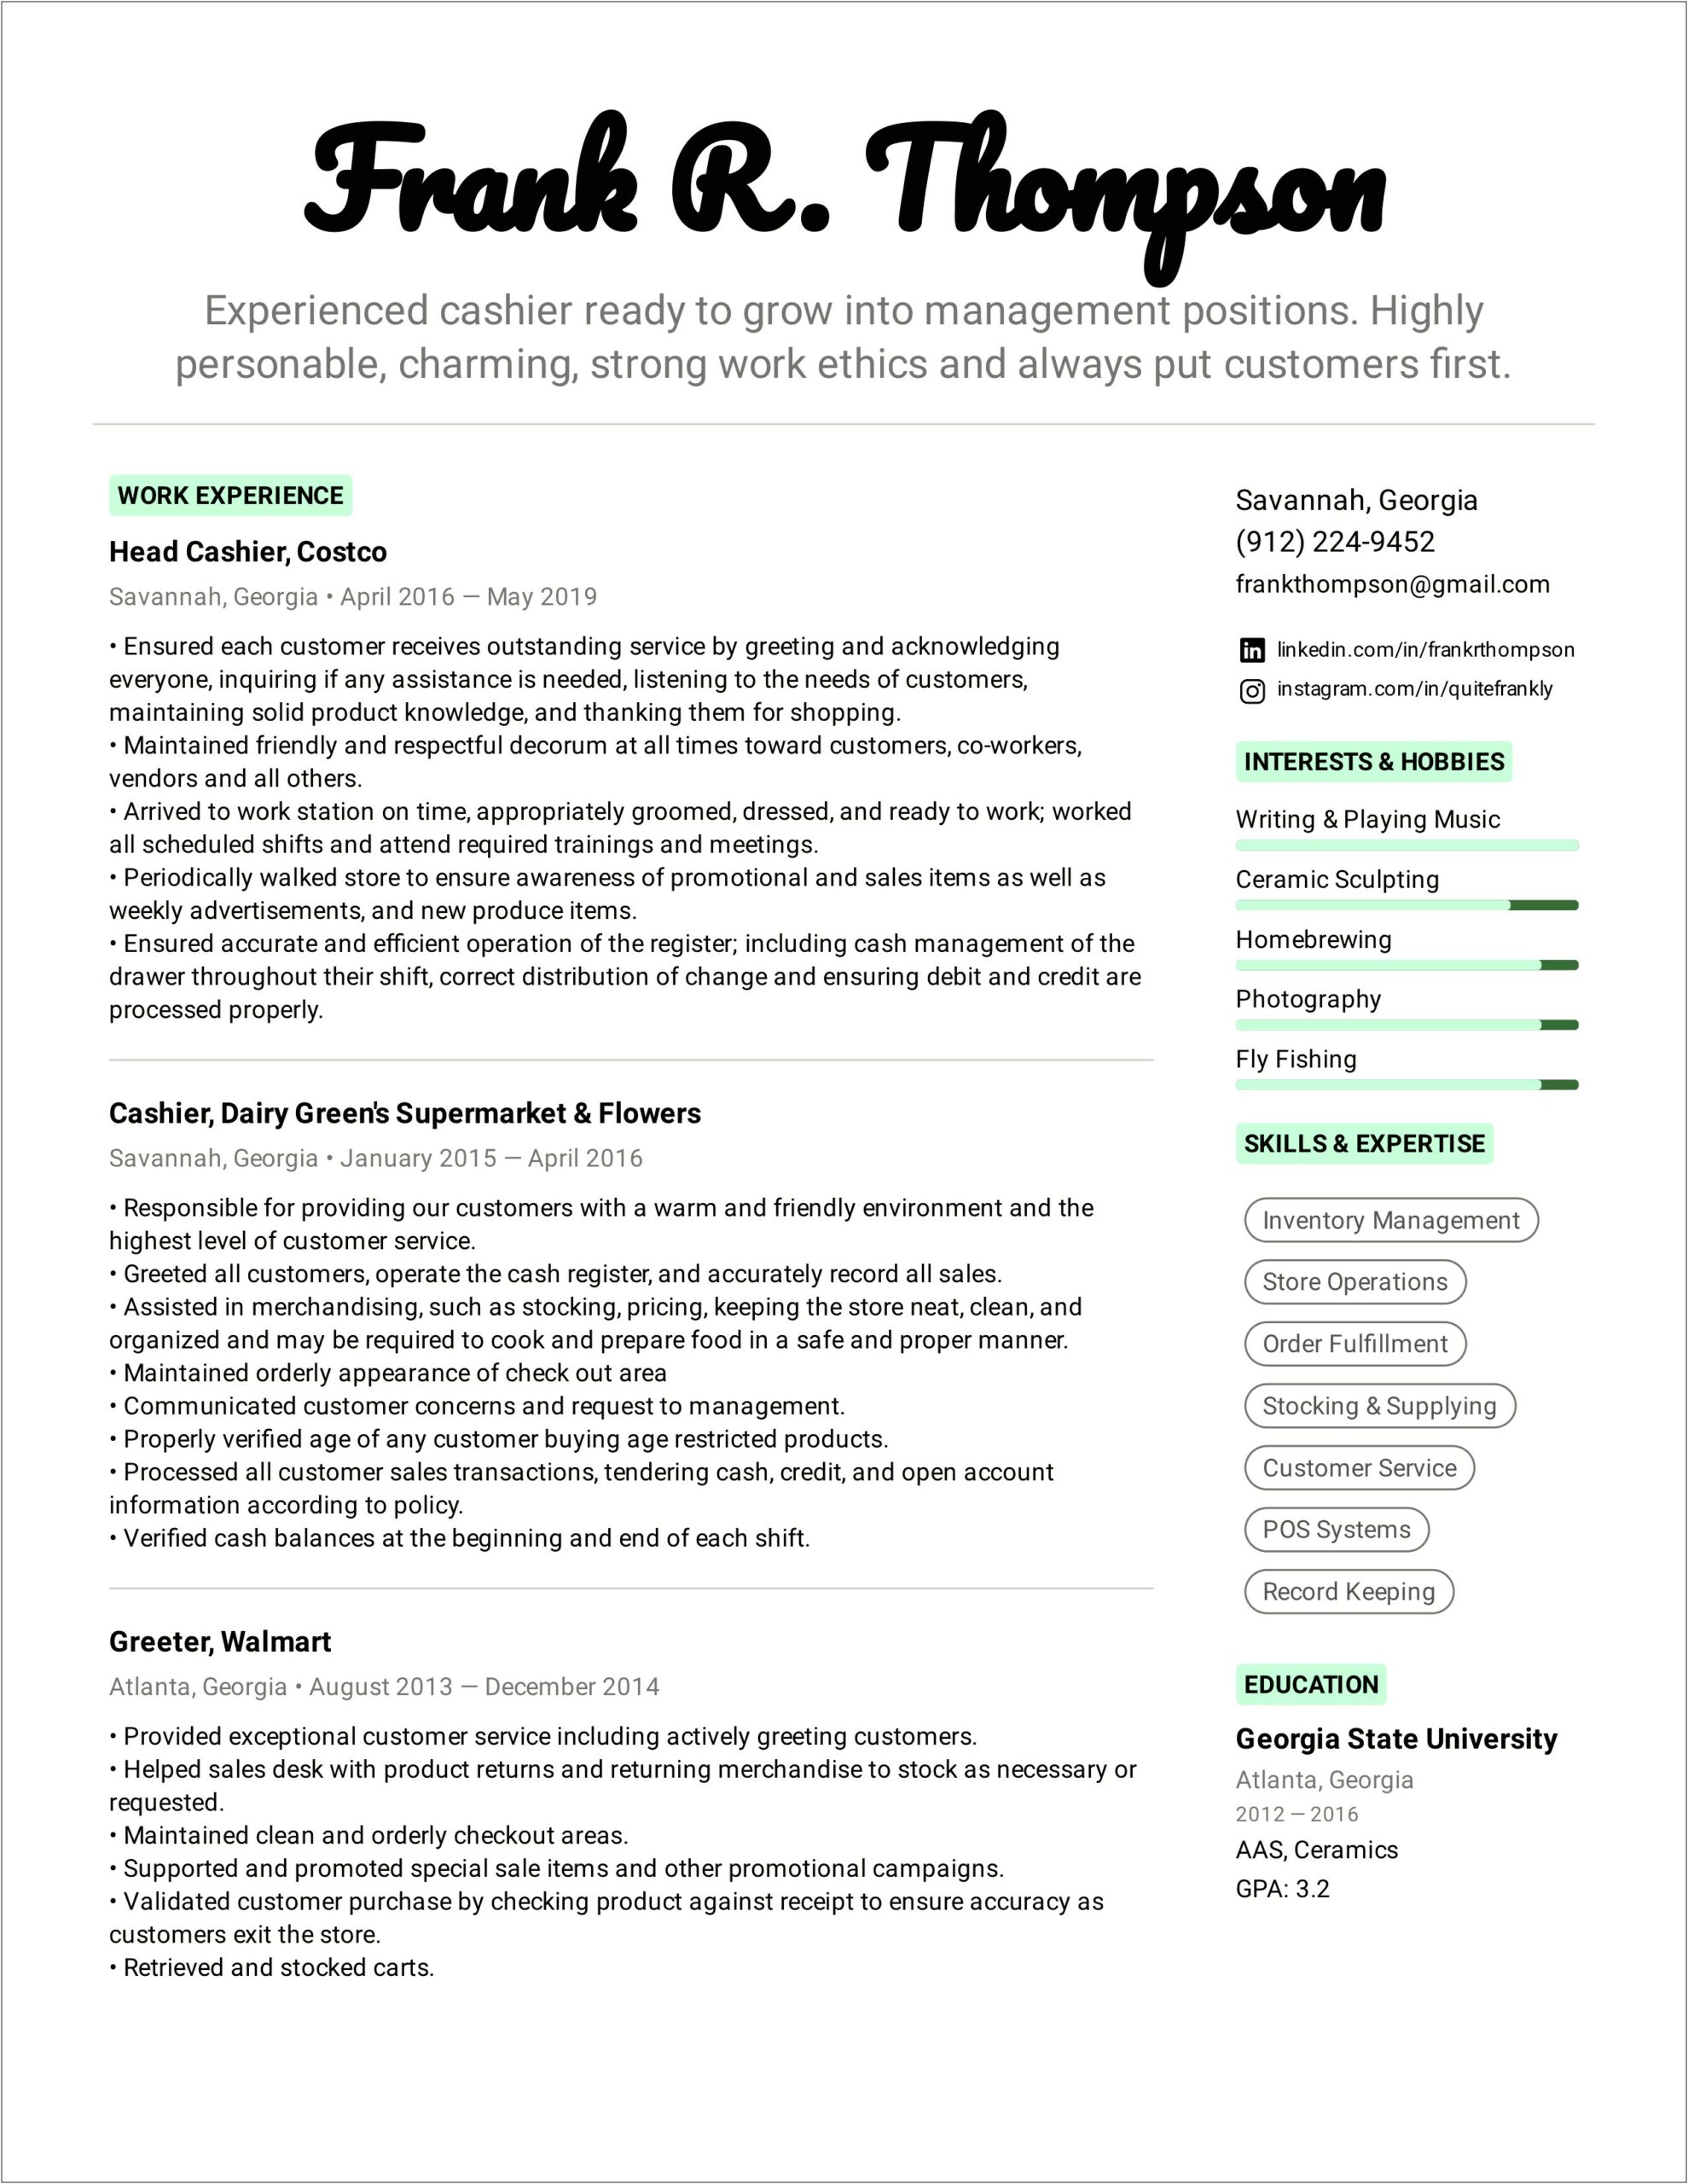 School Resume Sentence For Retail Store Inventory Optimization